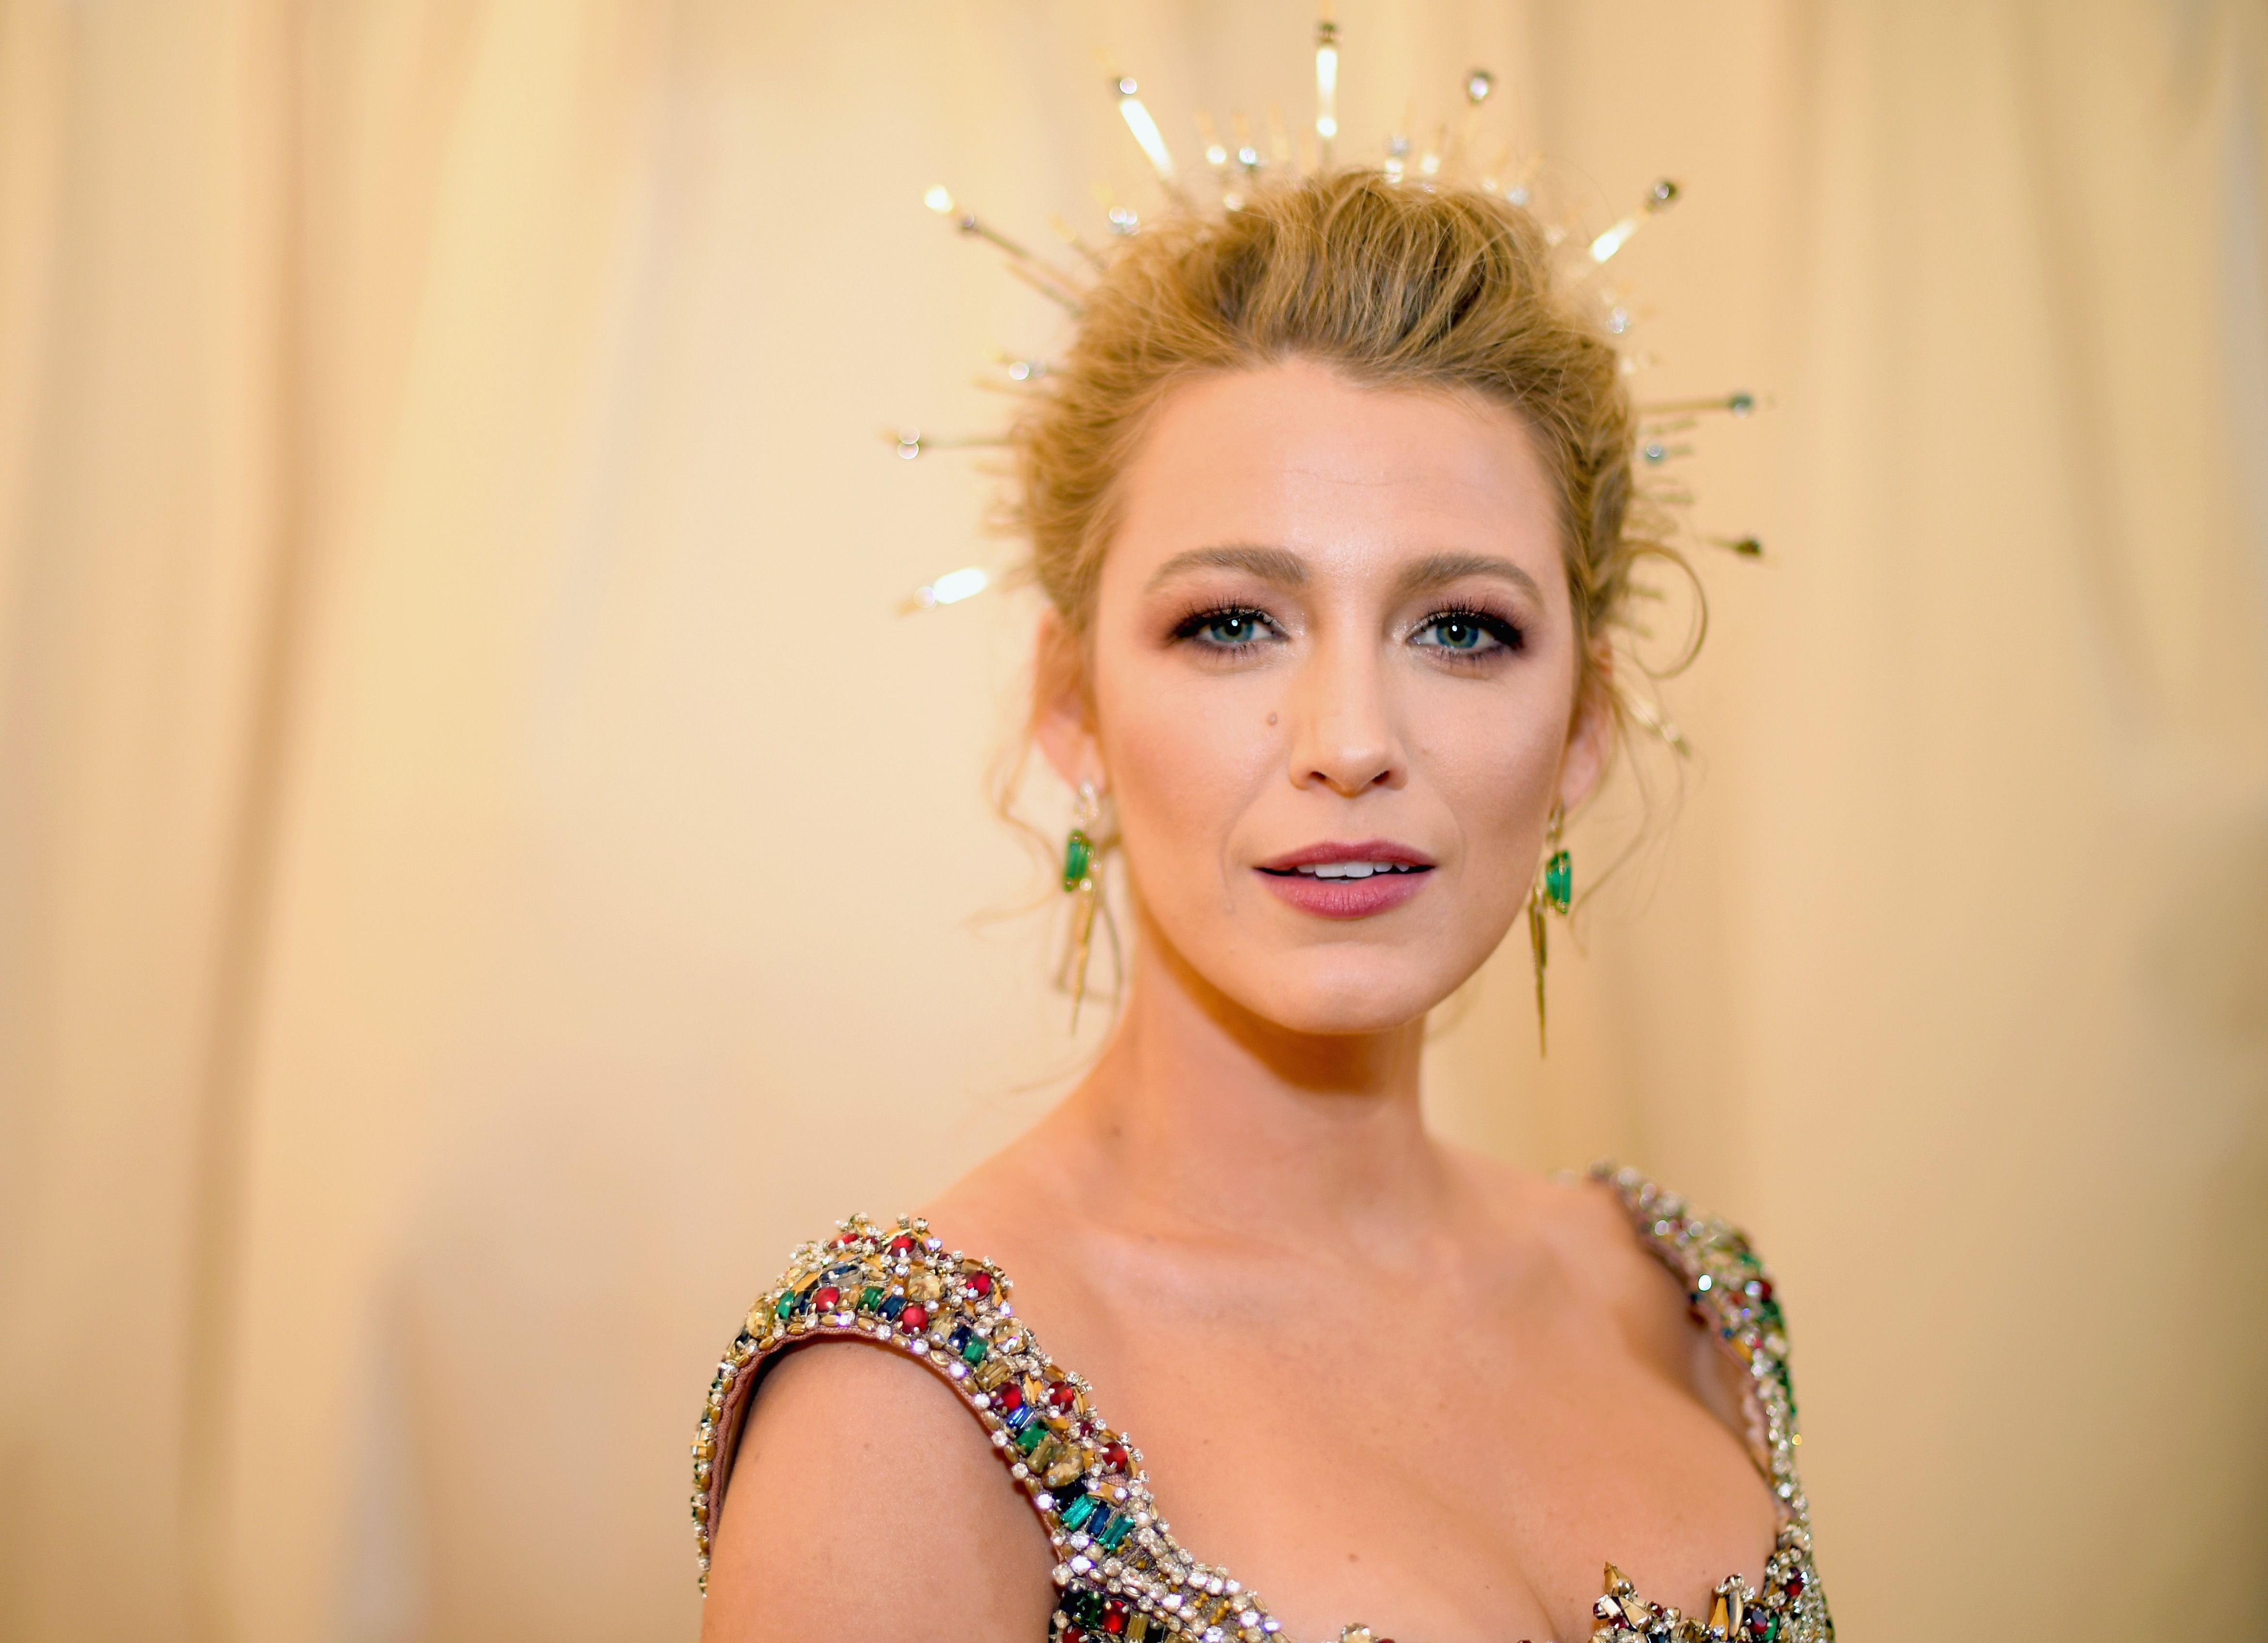 Blake Lively Eyelashes: Tips and Products for Getting Her Look